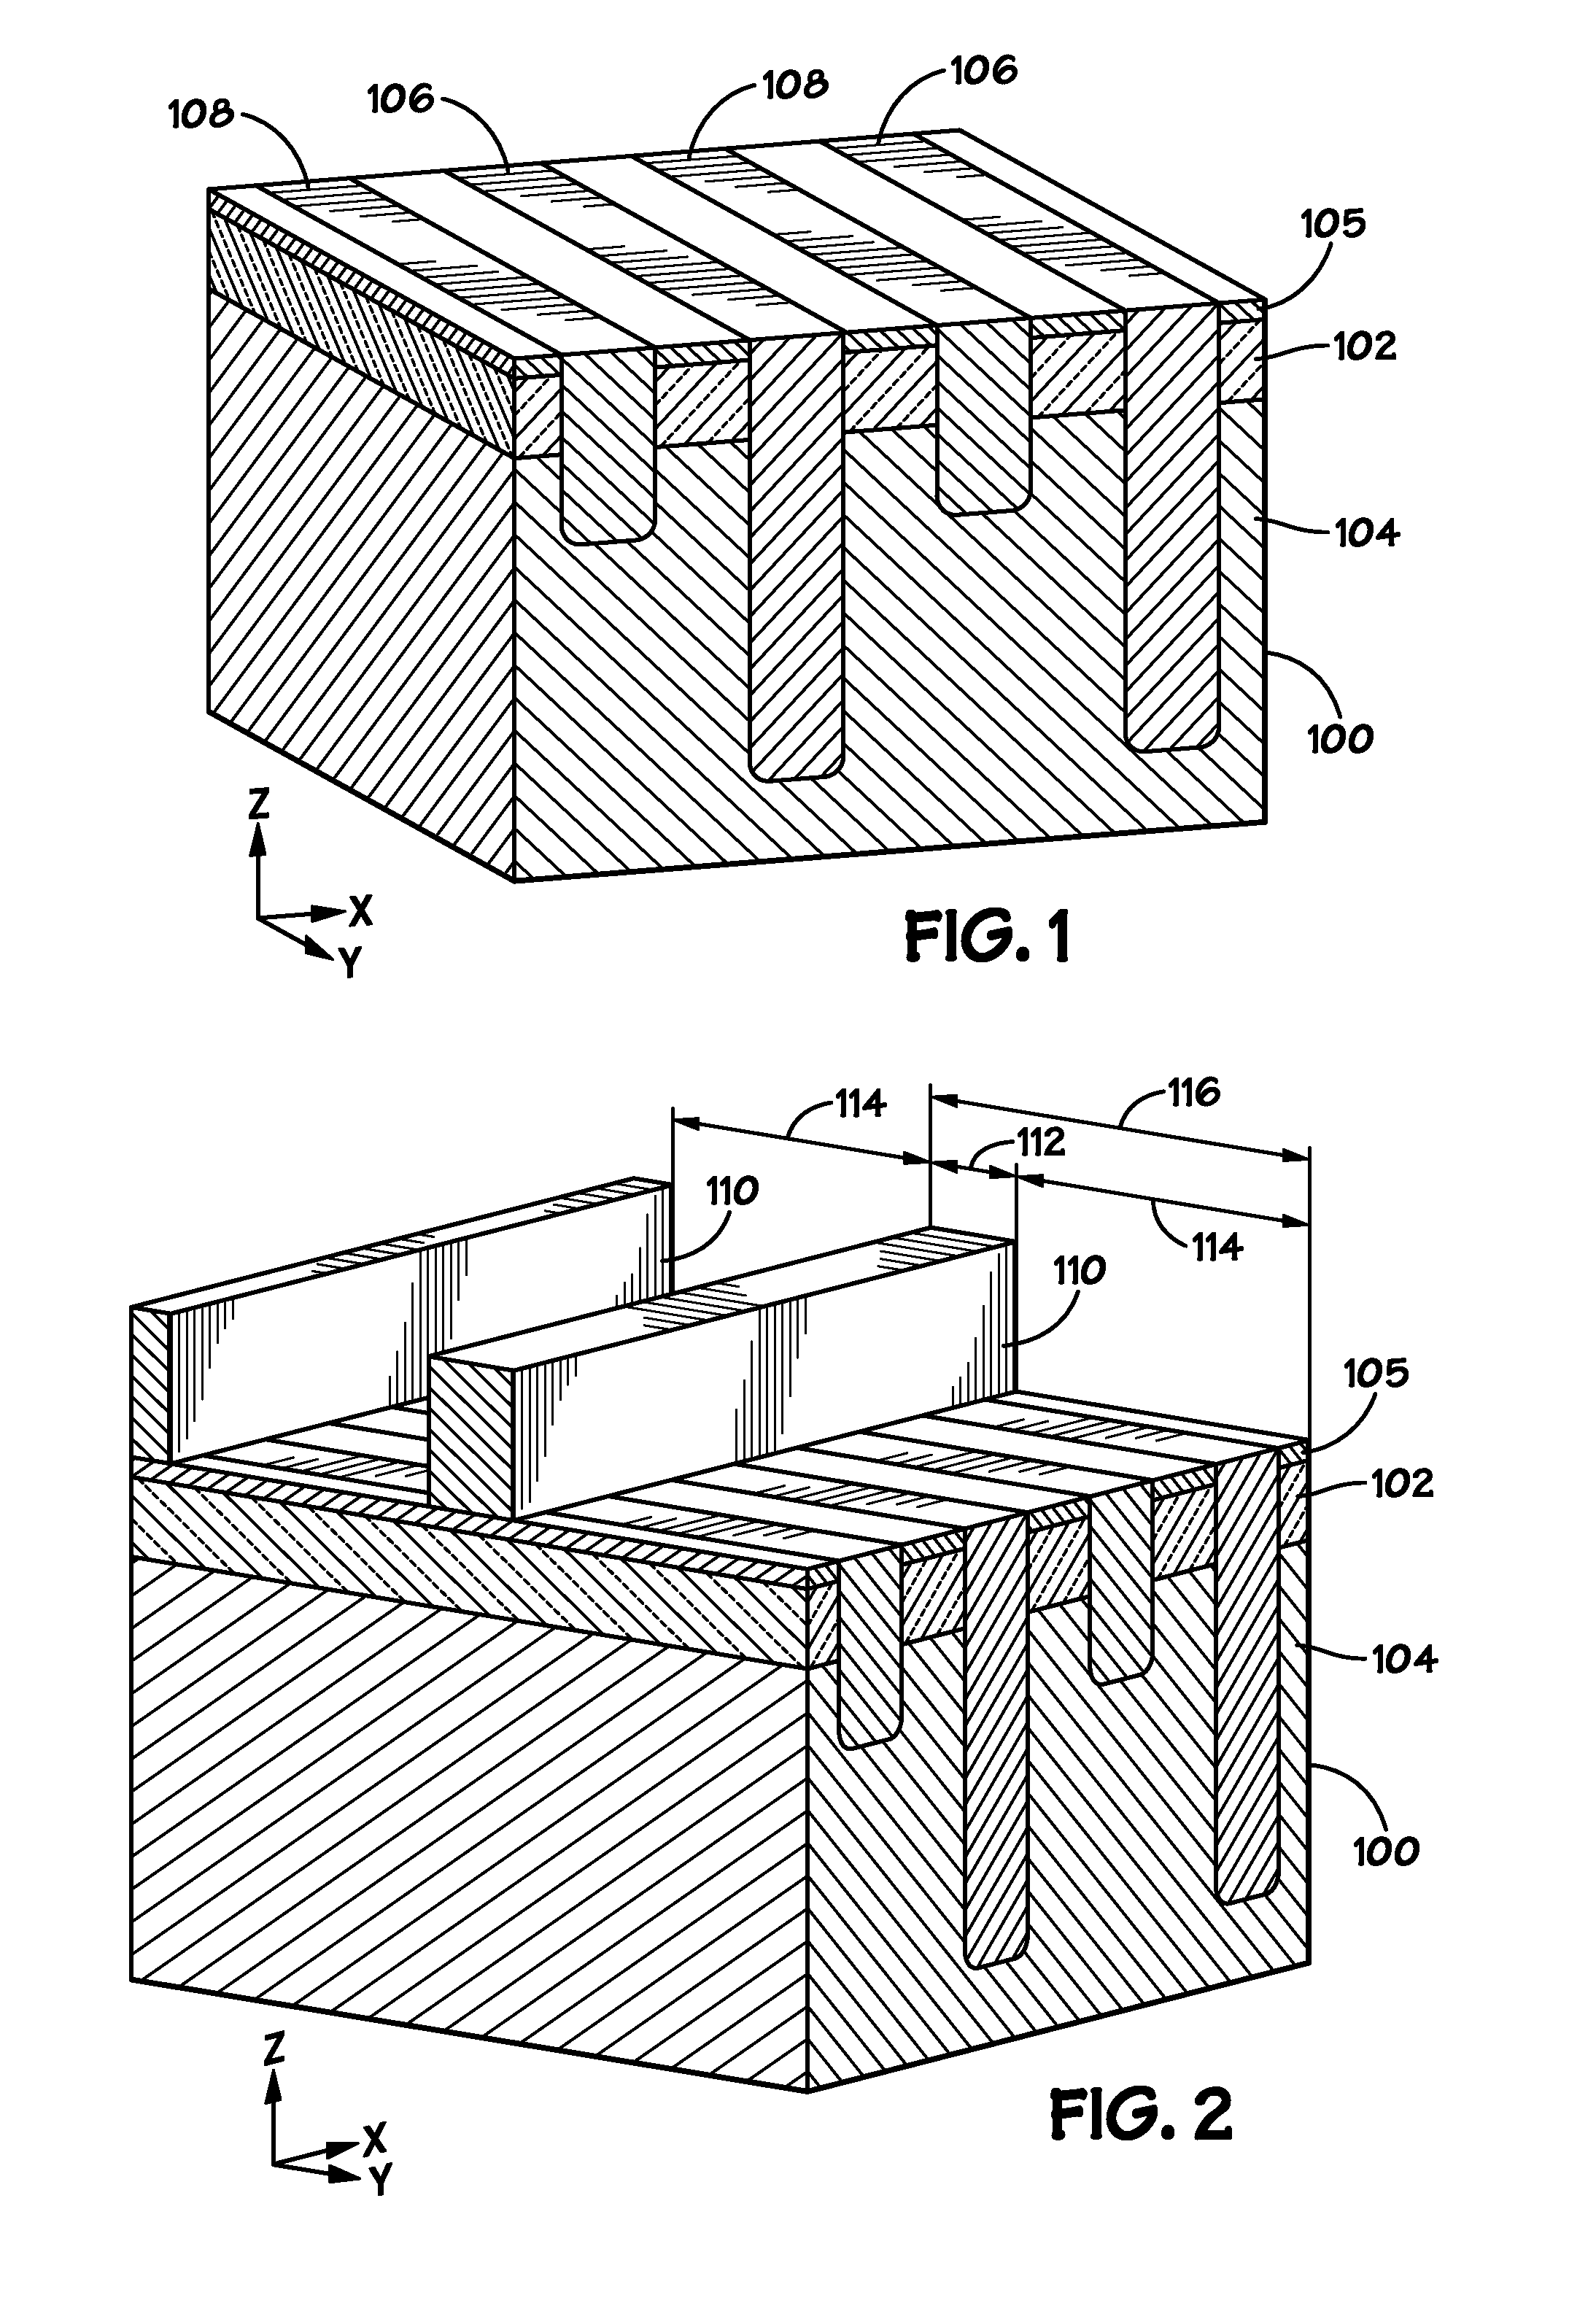 Cross-hair cell based floating body device